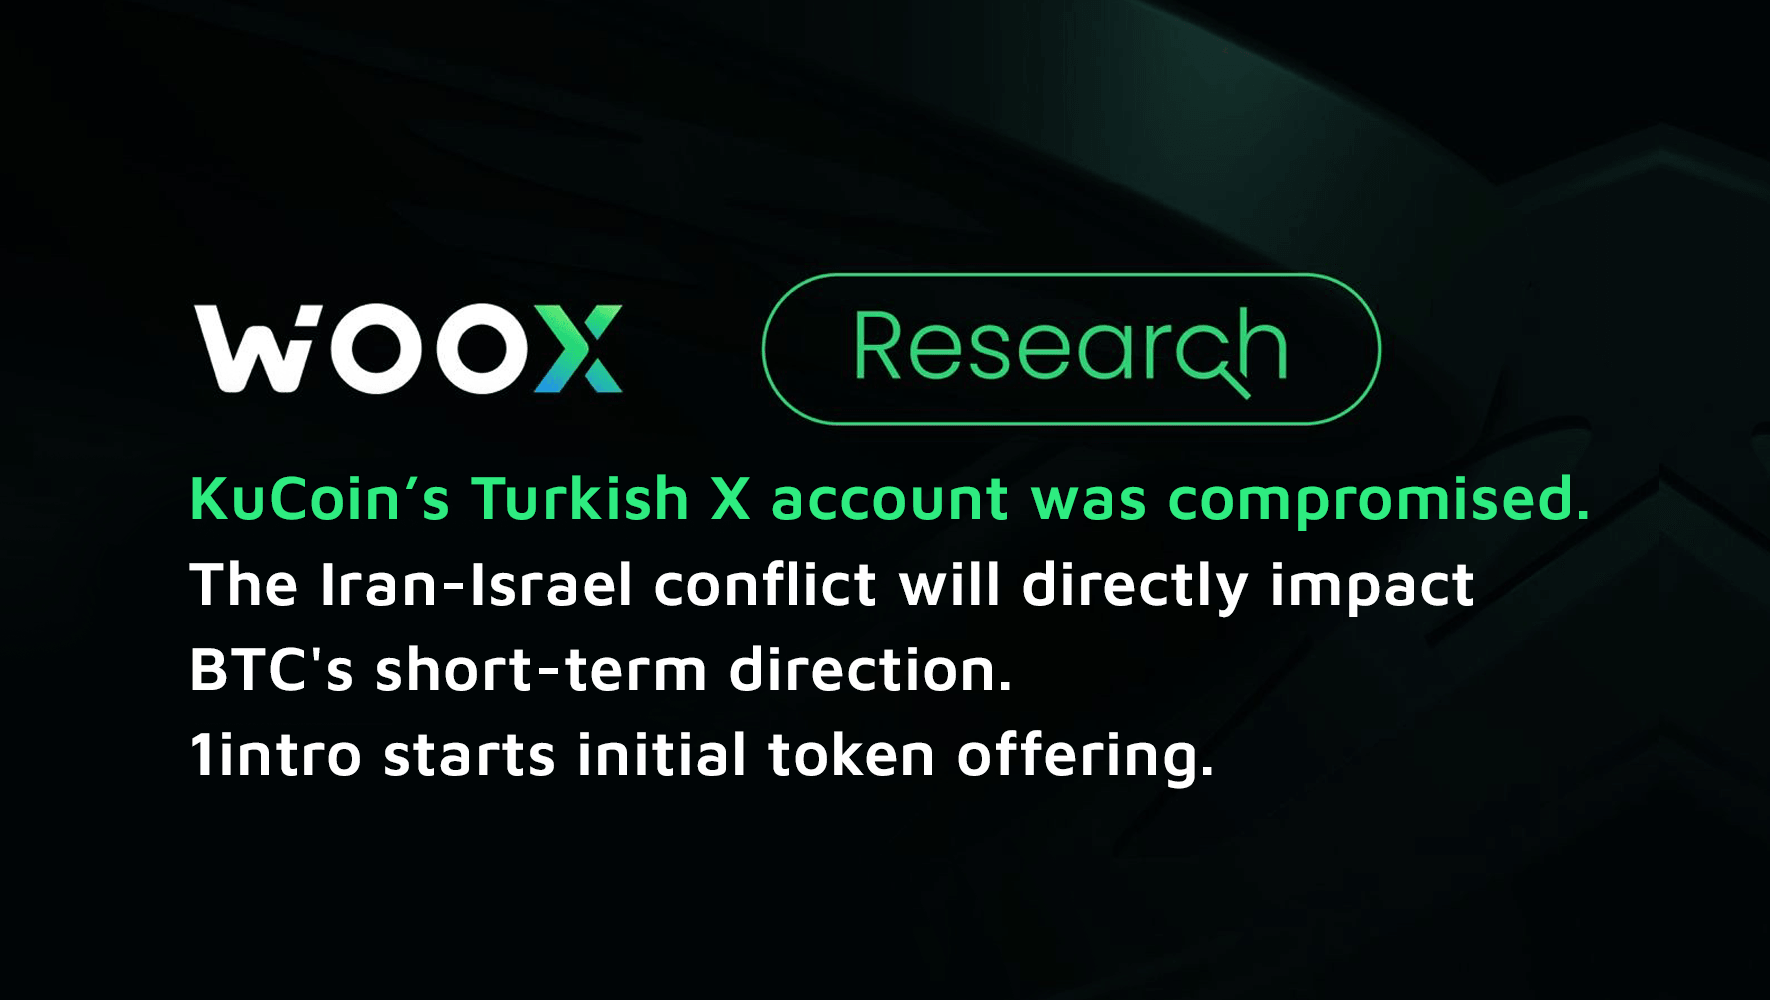 KuCoin’s Turkish X account was compromised